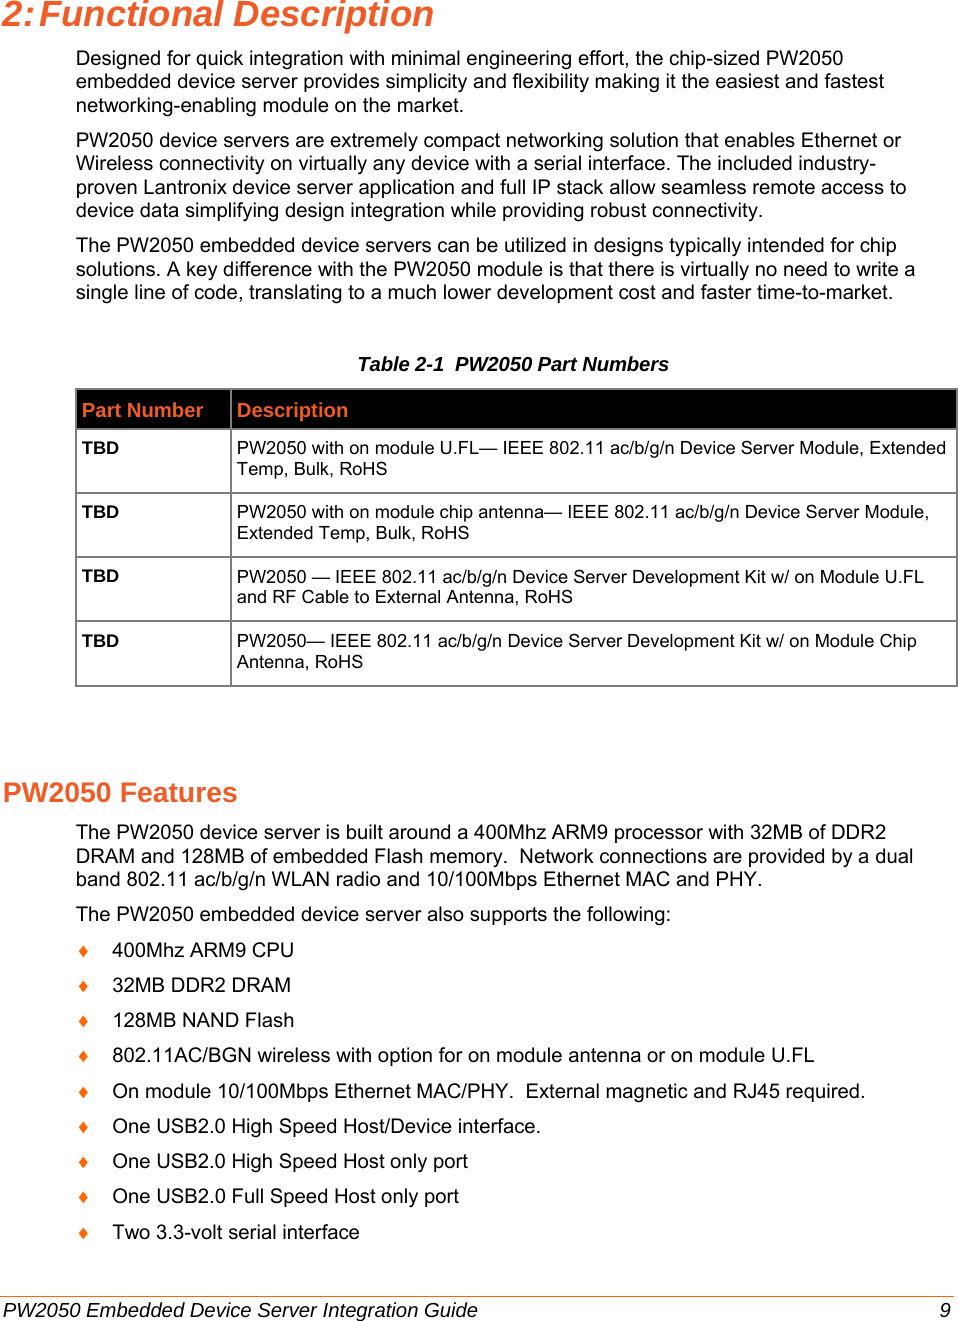      PW2050 Embedded Device Server Integration Guide  9 2: Functional  Description Designed for quick integration with minimal engineering effort, the chip-sized PW2050 embedded device server provides simplicity and flexibility making it the easiest and fastest networking-enabling module on the market. PW2050 device servers are extremely compact networking solution that enables Ethernet or Wireless connectivity on virtually any device with a serial interface. The included industry-proven Lantronix device server application and full IP stack allow seamless remote access to device data simplifying design integration while providing robust connectivity. The PW2050 embedded device servers can be utilized in designs typically intended for chip solutions. A key difference with the PW2050 module is that there is virtually no need to write a single line of code, translating to a much lower development cost and faster time-to-market. Table 2-1  PW2050 Part Numbers Part Number Description TBD PW2050 with on module U.FL— IEEE 802.11 ac/b/g/n Device Server Module, Extended Temp, Bulk, RoHS TBD PW2050 with on module chip antenna— IEEE 802.11 ac/b/g/n Device Server Module, Extended Temp, Bulk, RoHS TBD  PW2050 — IEEE 802.11 ac/b/g/n Device Server Development Kit w/ on Module U.FL and RF Cable to External Antenna, RoHS TBD  PW2050— IEEE 802.11 ac/b/g/n Device Server Development Kit w/ on Module Chip Antenna, RoHS  PW2050 Features The PW2050 device server is built around a 400Mhz ARM9 processor with 32MB of DDR2 DRAM and 128MB of embedded Flash memory.  Network connections are provided by a dual band 802.11 ac/b/g/n WLAN radio and 10/100Mbps Ethernet MAC and PHY. The PW2050 embedded device server also supports the following:  ♦ 400Mhz ARM9 CPU ♦ 32MB DDR2 DRAM ♦ 128MB NAND Flash ♦ 802.11AC/BGN wireless with option for on module antenna or on module U.FL ♦ On module 10/100Mbps Ethernet MAC/PHY.  External magnetic and RJ45 required. ♦ One USB2.0 High Speed Host/Device interface. ♦ One USB2.0 High Speed Host only port ♦ One USB2.0 Full Speed Host only port ♦ Two 3.3-volt serial interface  